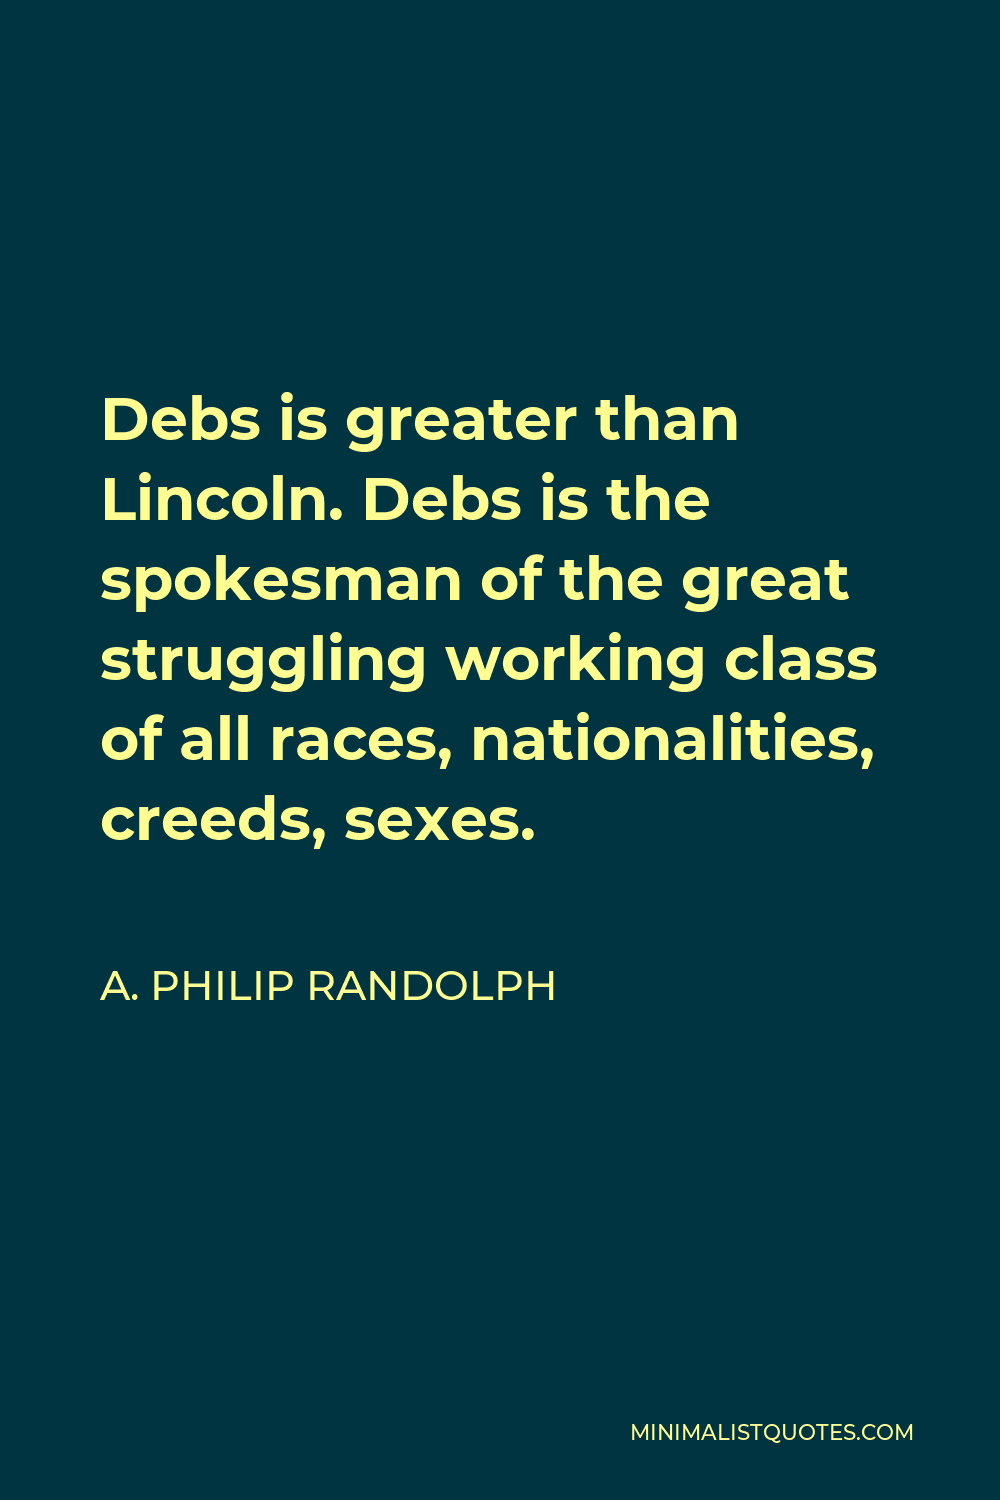 A. Philip Randolph Quote - Debs is greater than Lincoln. Debs is the spokesman of the great struggling working class of all races, nationalities, creeds, sexes.